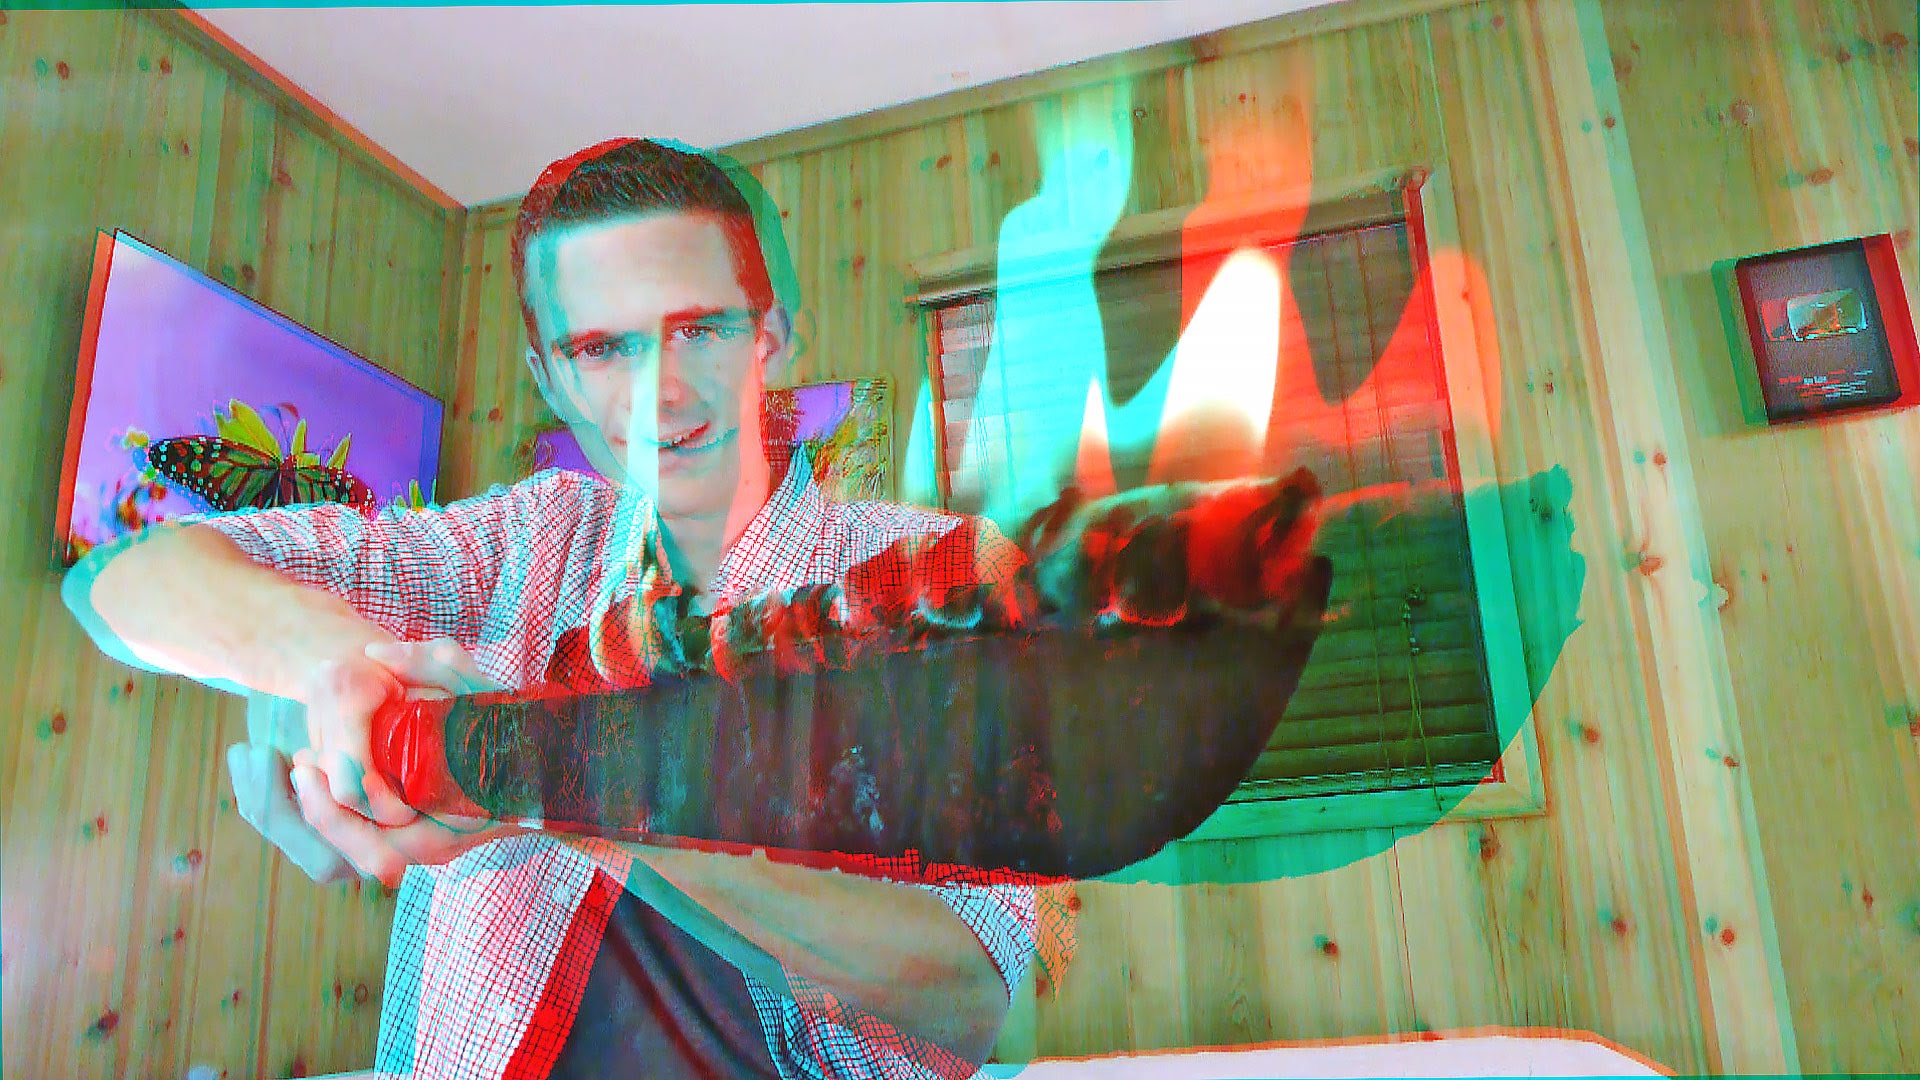 3D Video Extreme SCARY FIRE SWORD!!! - YouTube